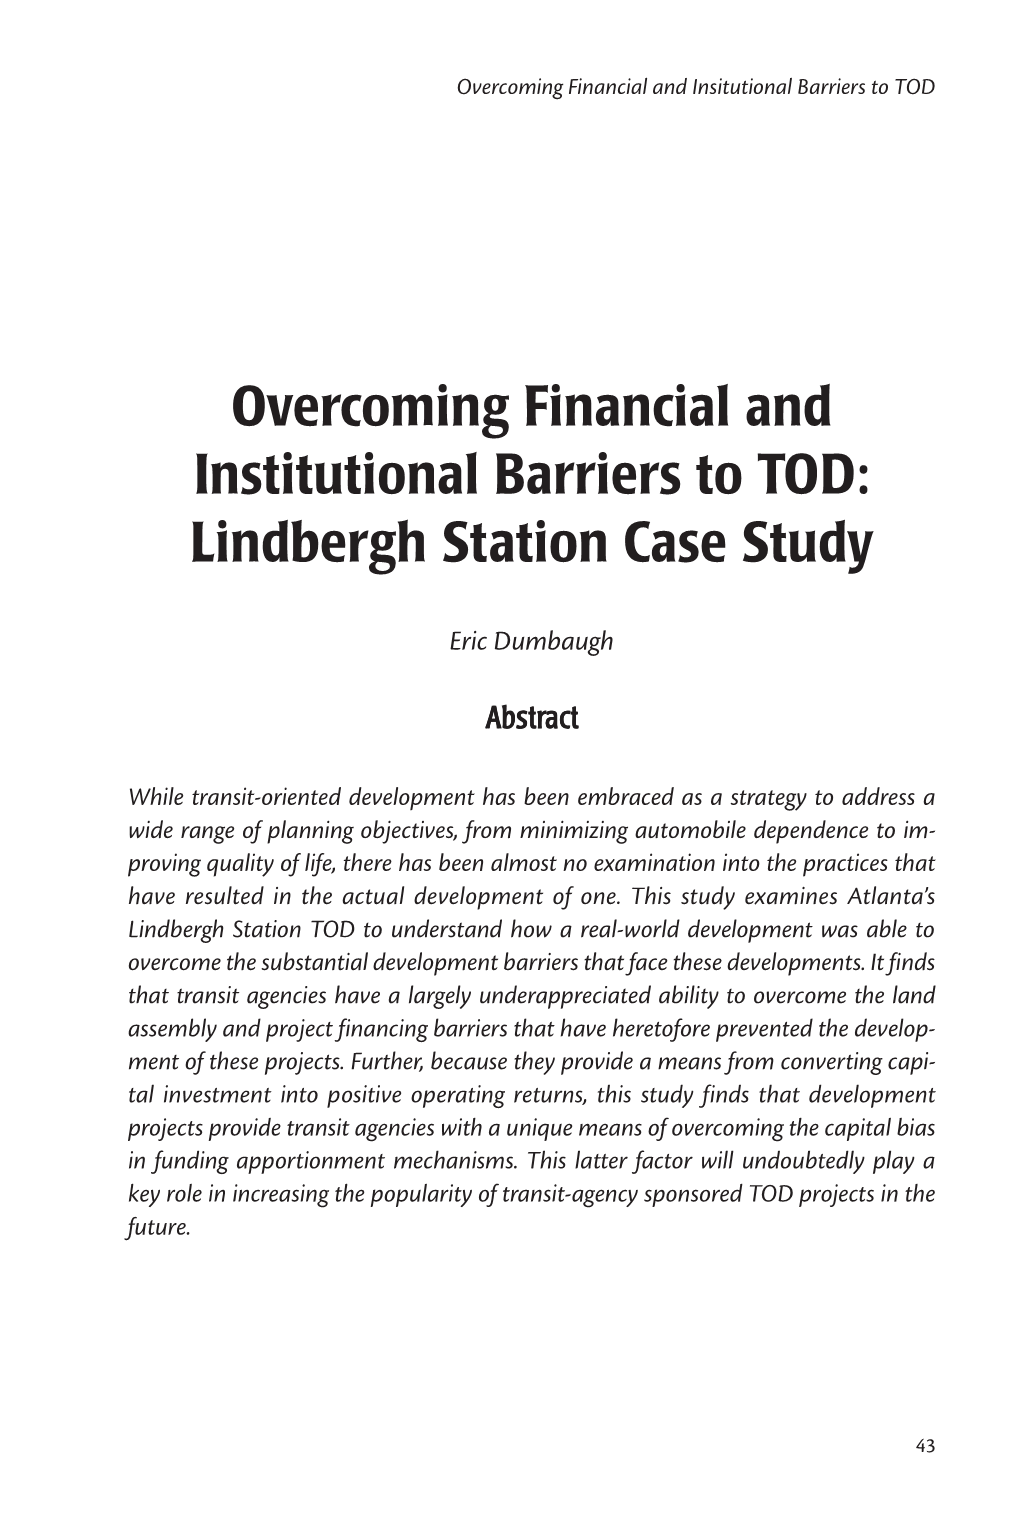 Overcoming Financial and Institutional Barriers to TOD: Lindbergh Station Case Study